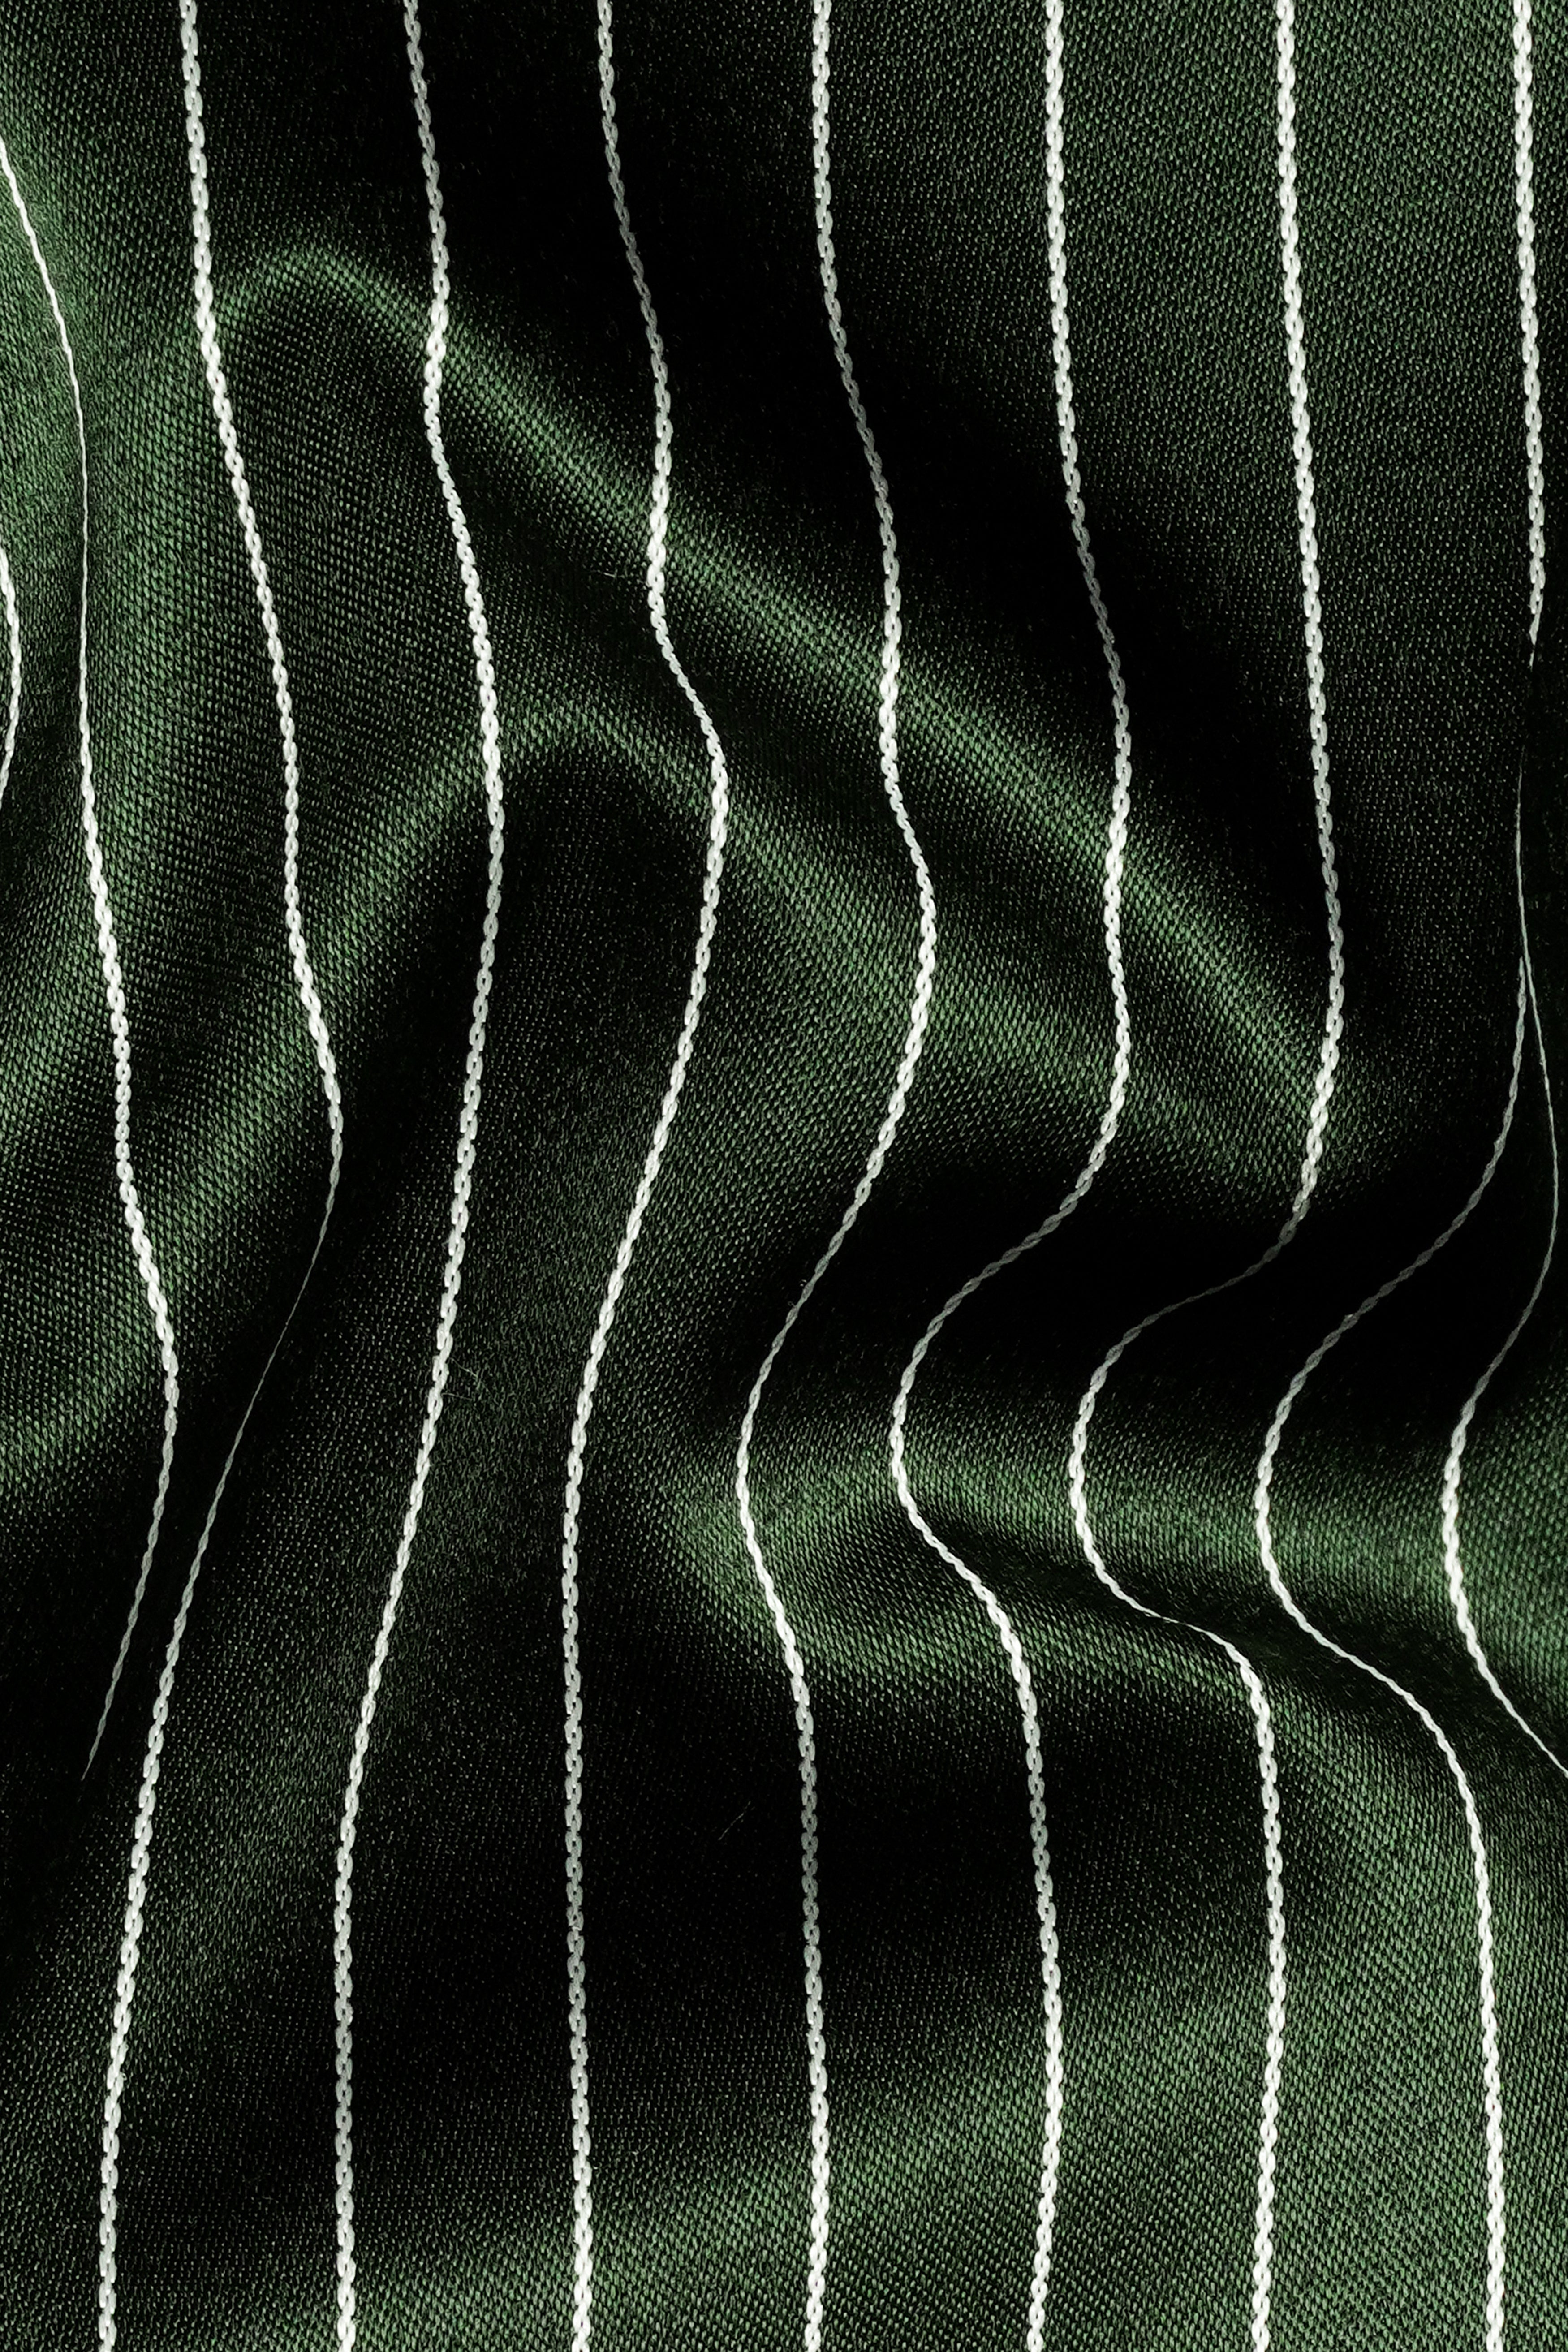 Myrtle Green and White Striped Wool Rich Blazer BL3086-SB-36, BL3086-SB-38, BL3086-SB-40, BL3086-SB-42, BL3086-SB-44, BL3086-SB-46, BL3086-SB-48, BL3086-SB-50, BL3086-SB-52, BL3086-SB-54, BL3086-SB-56, BL3086-SB-58, BL3086-SB-60